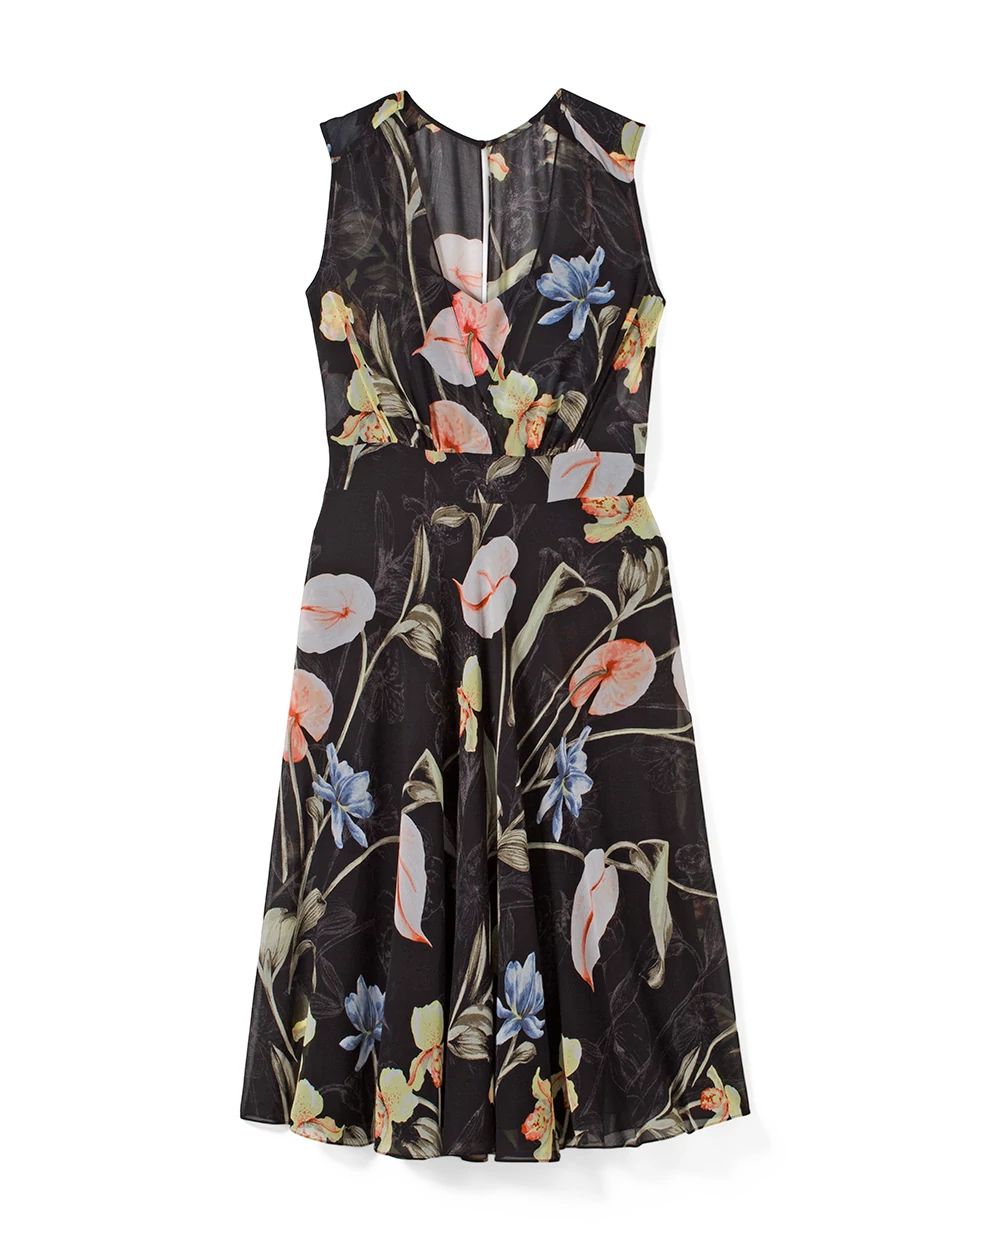 Sleeveless Floral Overlay Midi Dress click to view larger image.